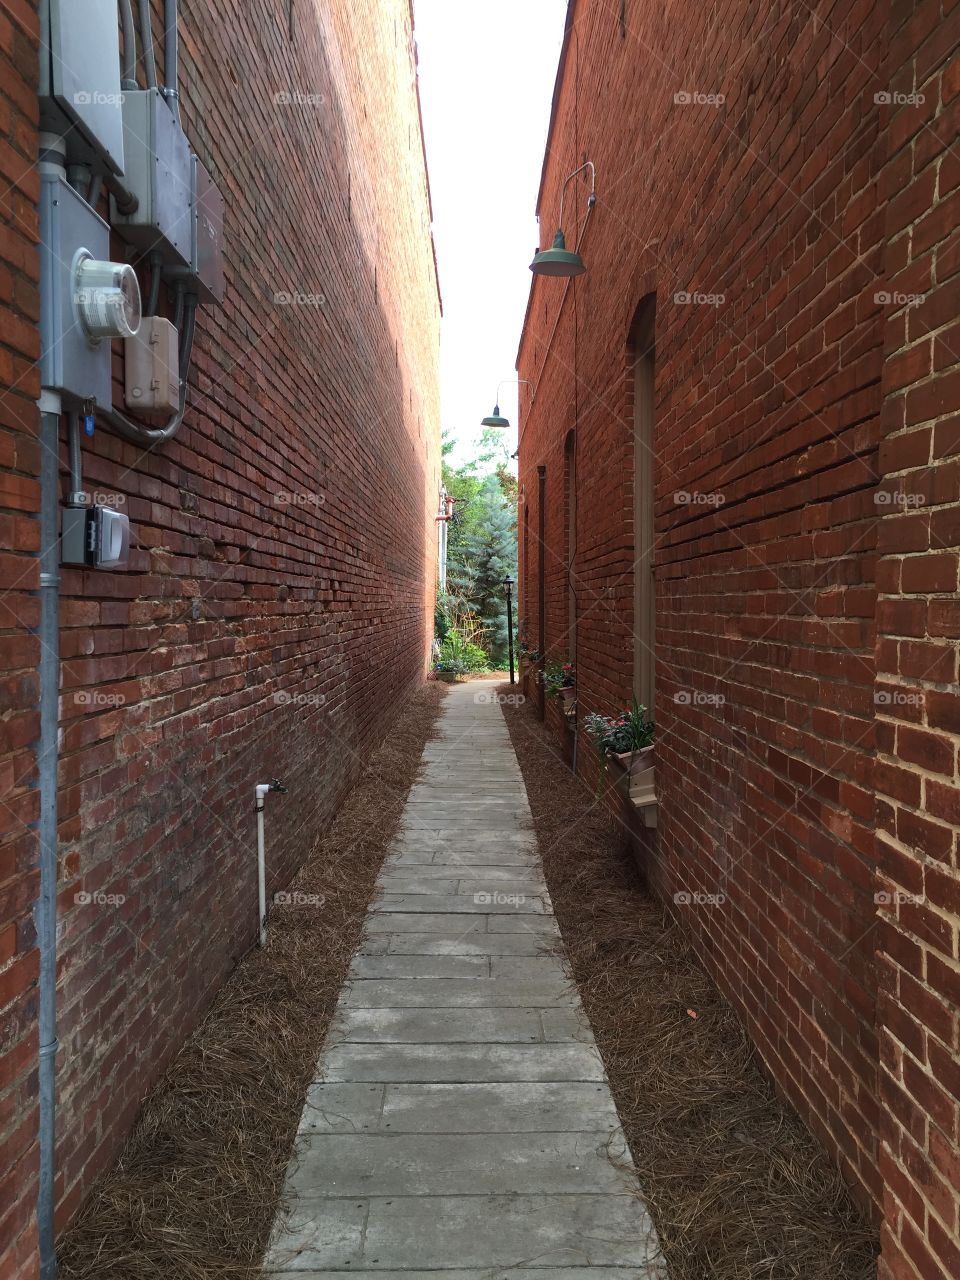 Alley way between two historic buildings in Plains, Georgia.